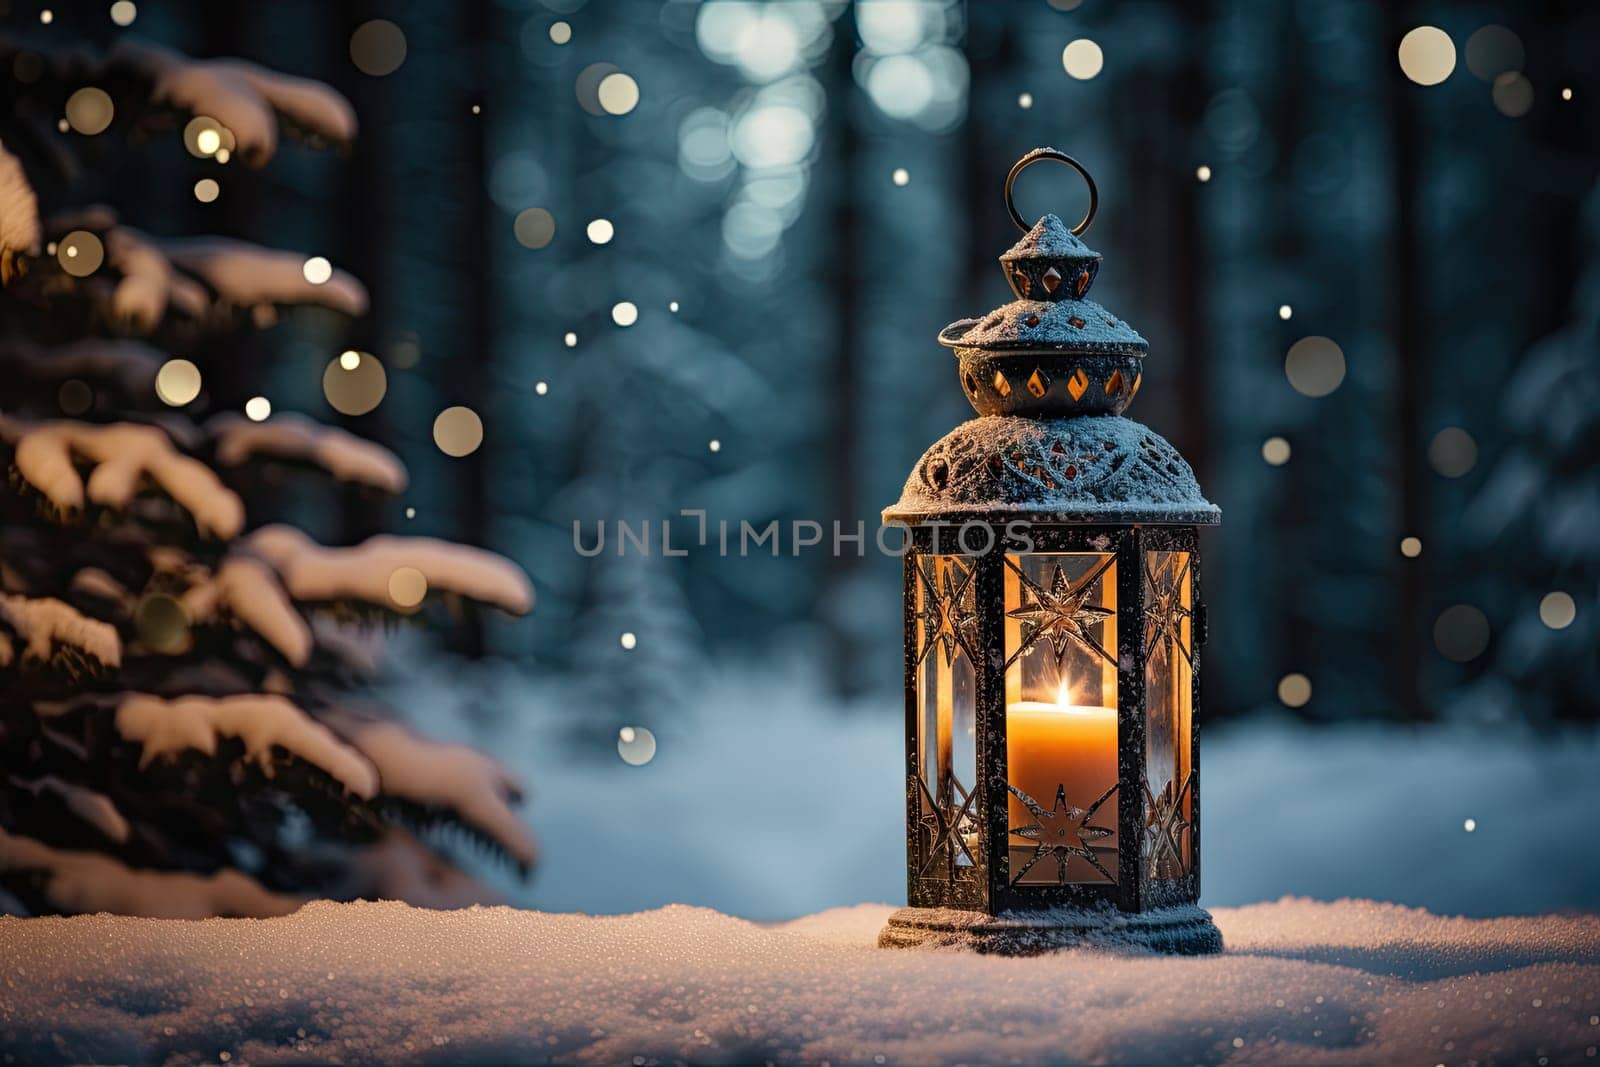 A lit lantern in the snow with a pine tree in the background by golibtolibov